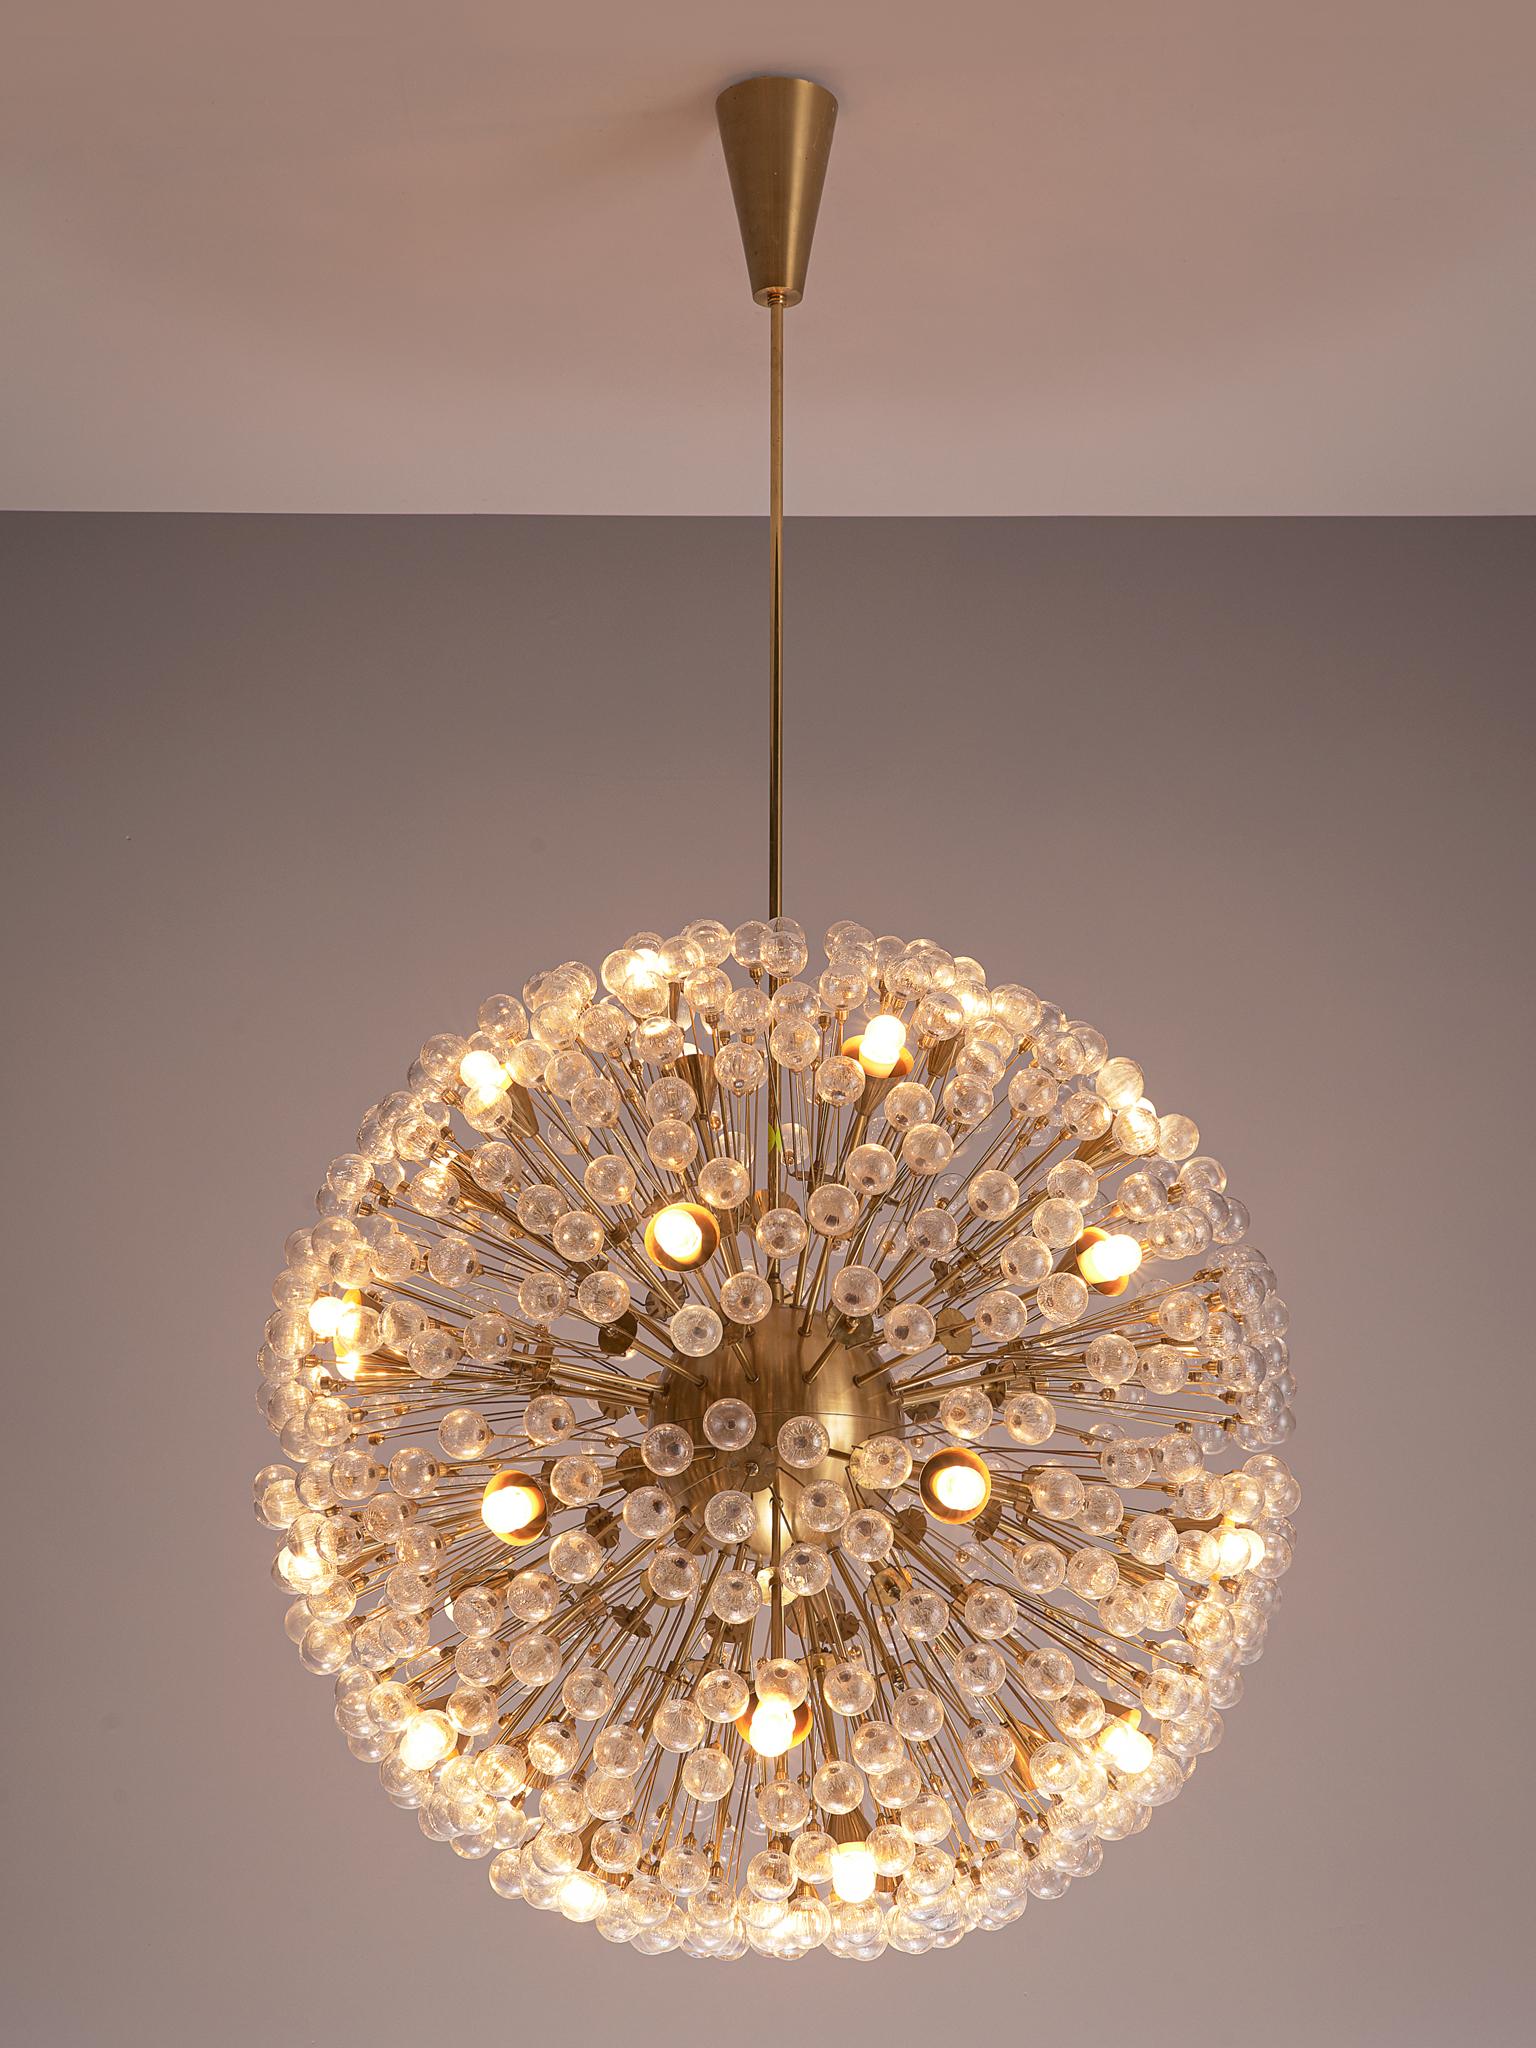 'Sputnik' chandeliers, brass and glass, Austria, 1960s.

The brass sputnik shaped frame is very elegantly finished with several diamond shaped glass ornaments and faceted glass beads. The glass absorb the light very nice which creates a wonderful